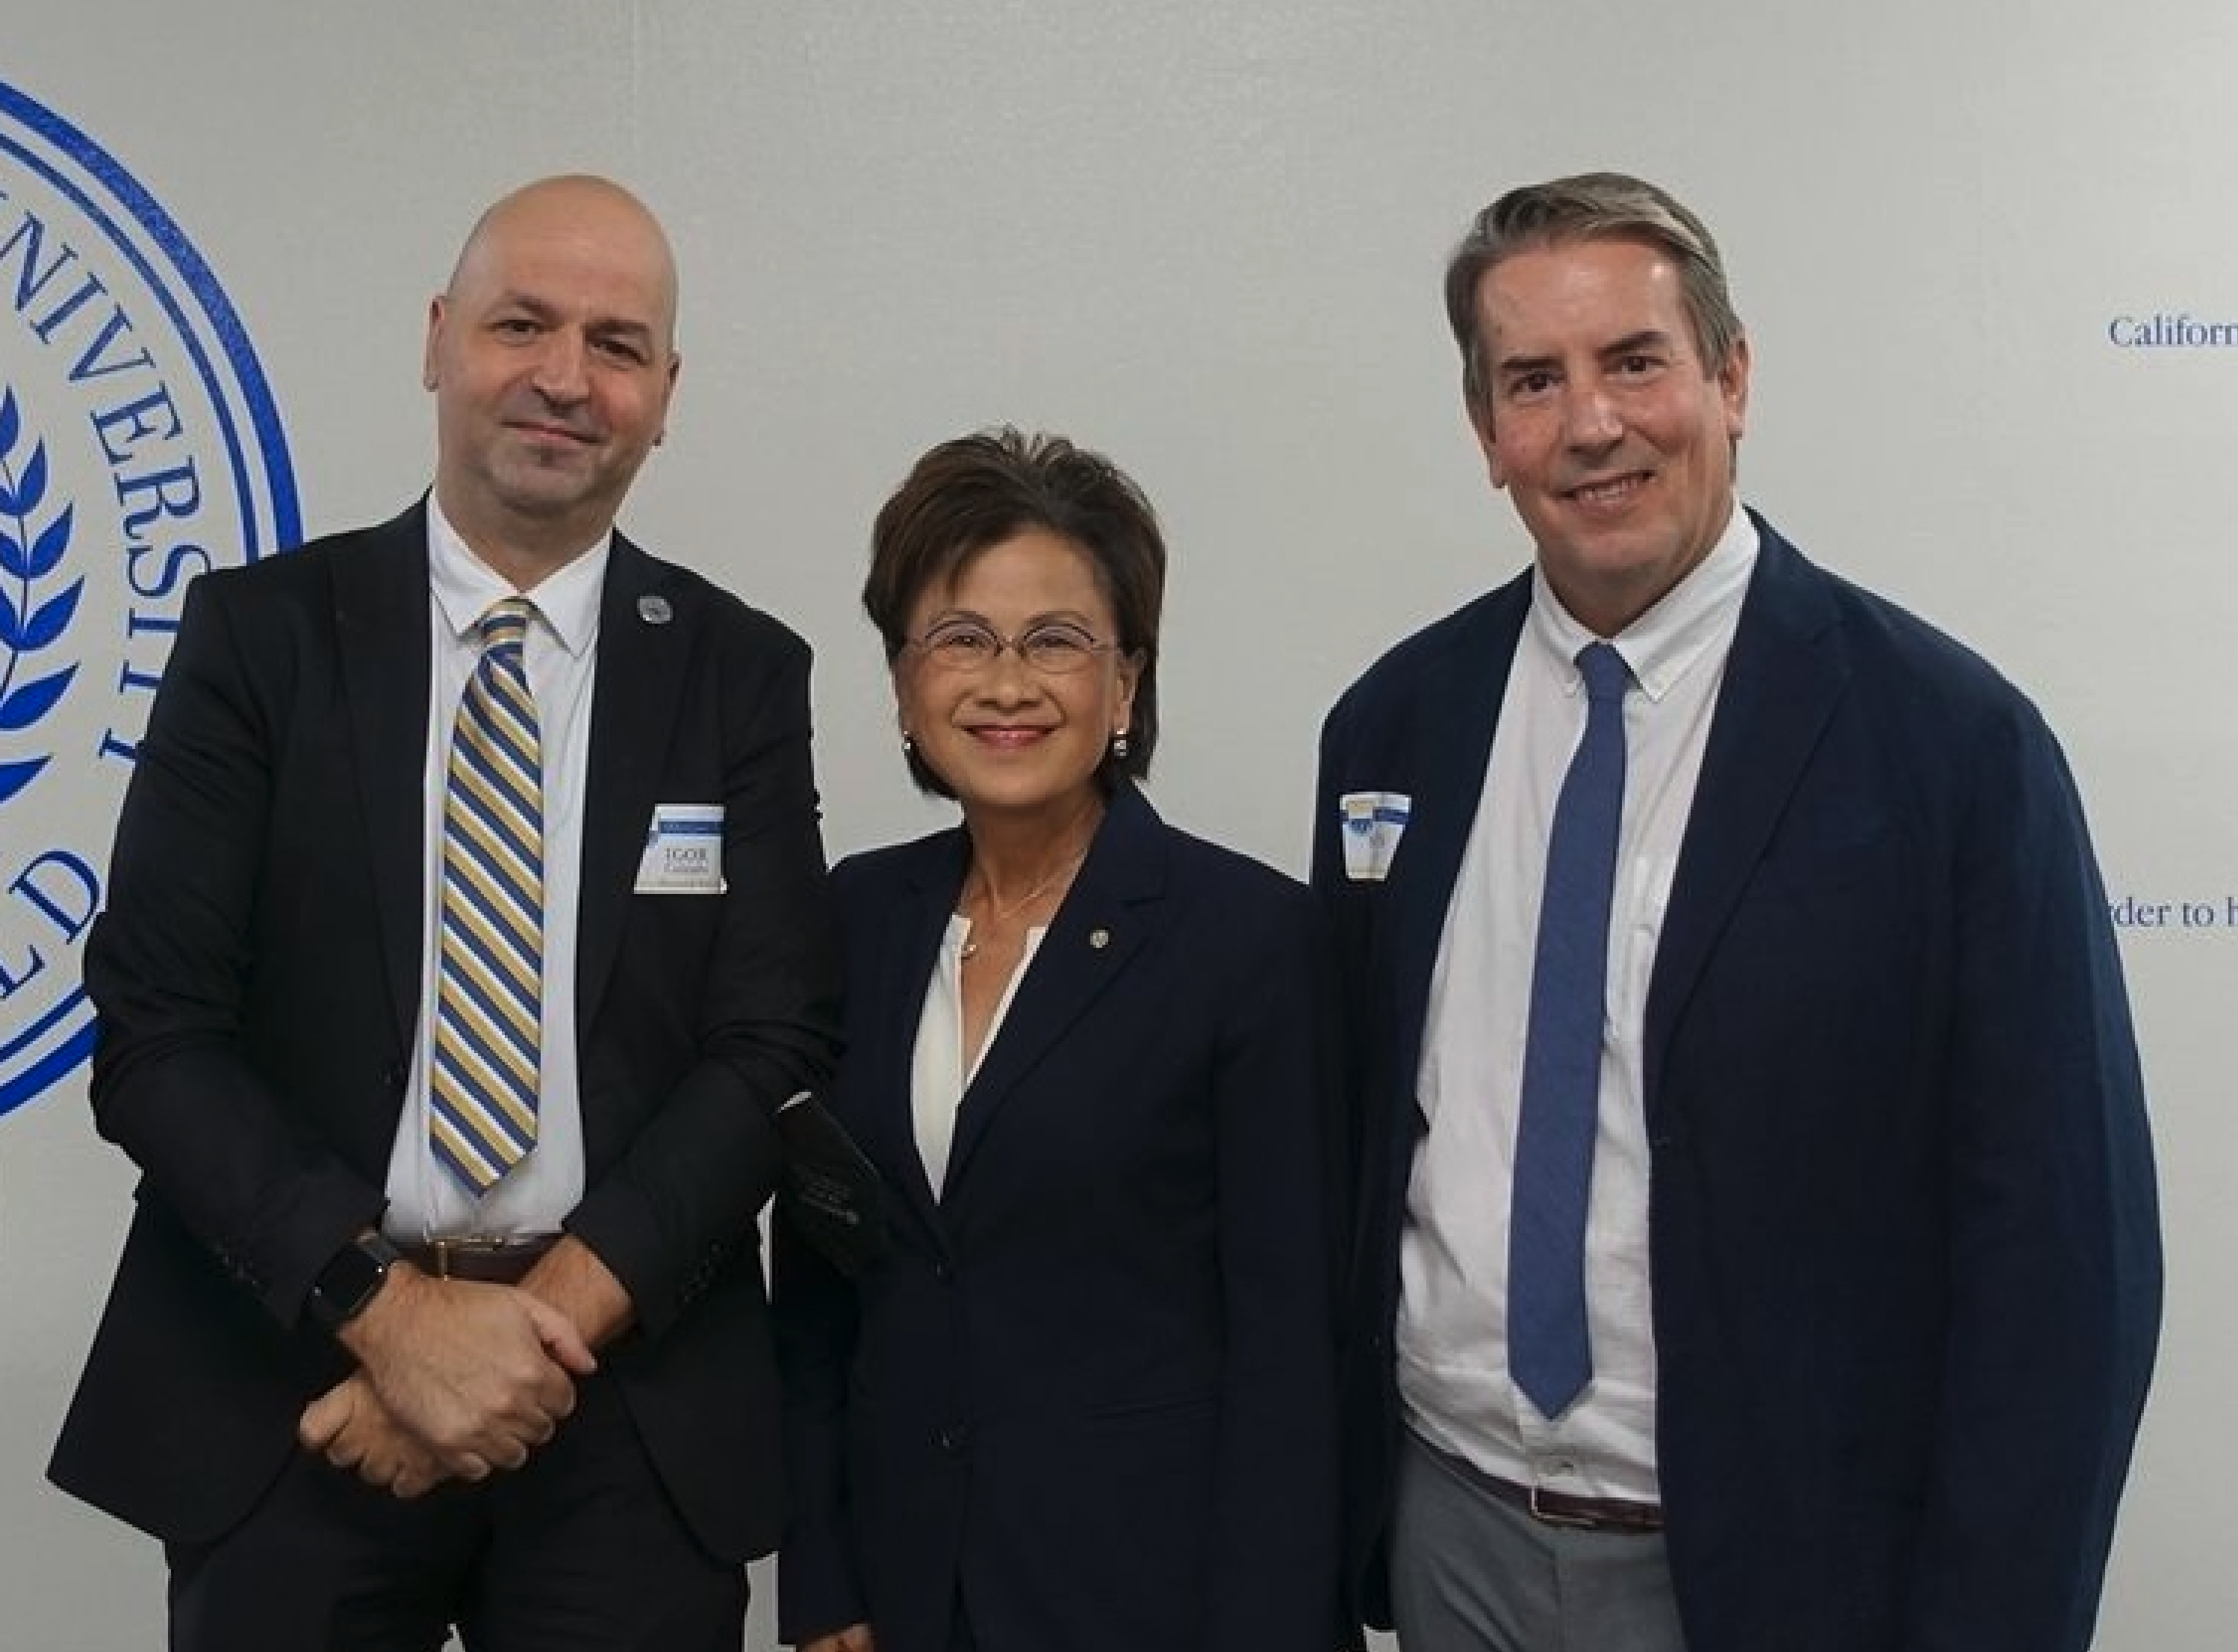 Fulbright Scholar-in-Residence Reception (left to right) Dr Igor Calzada, Mayor of Bakersfield, Karen Goh, and Director of Institute for Basque Studies, Dr Steven Gamboa